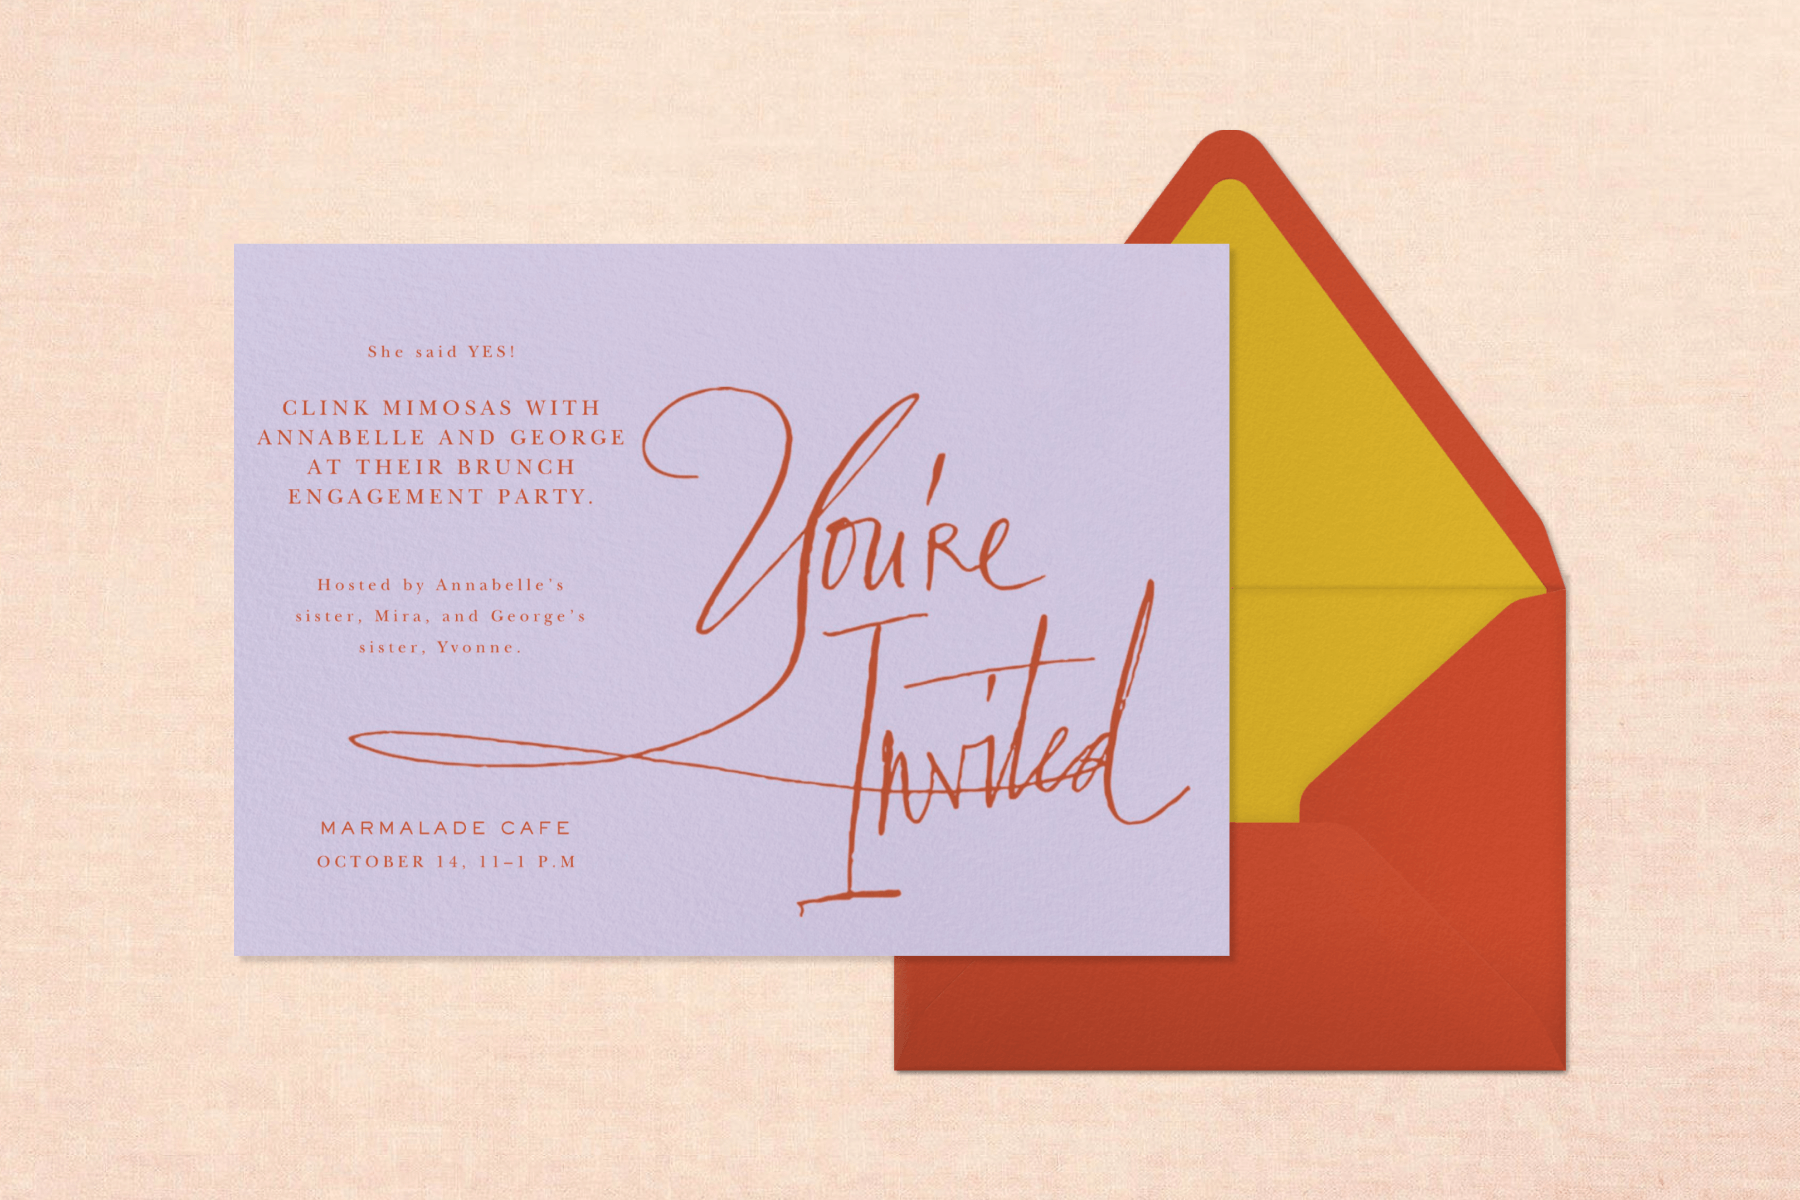 A lavender engagement party invitation with large calligraphic script that reads “You’re Invited” with a burnt orange envelope.